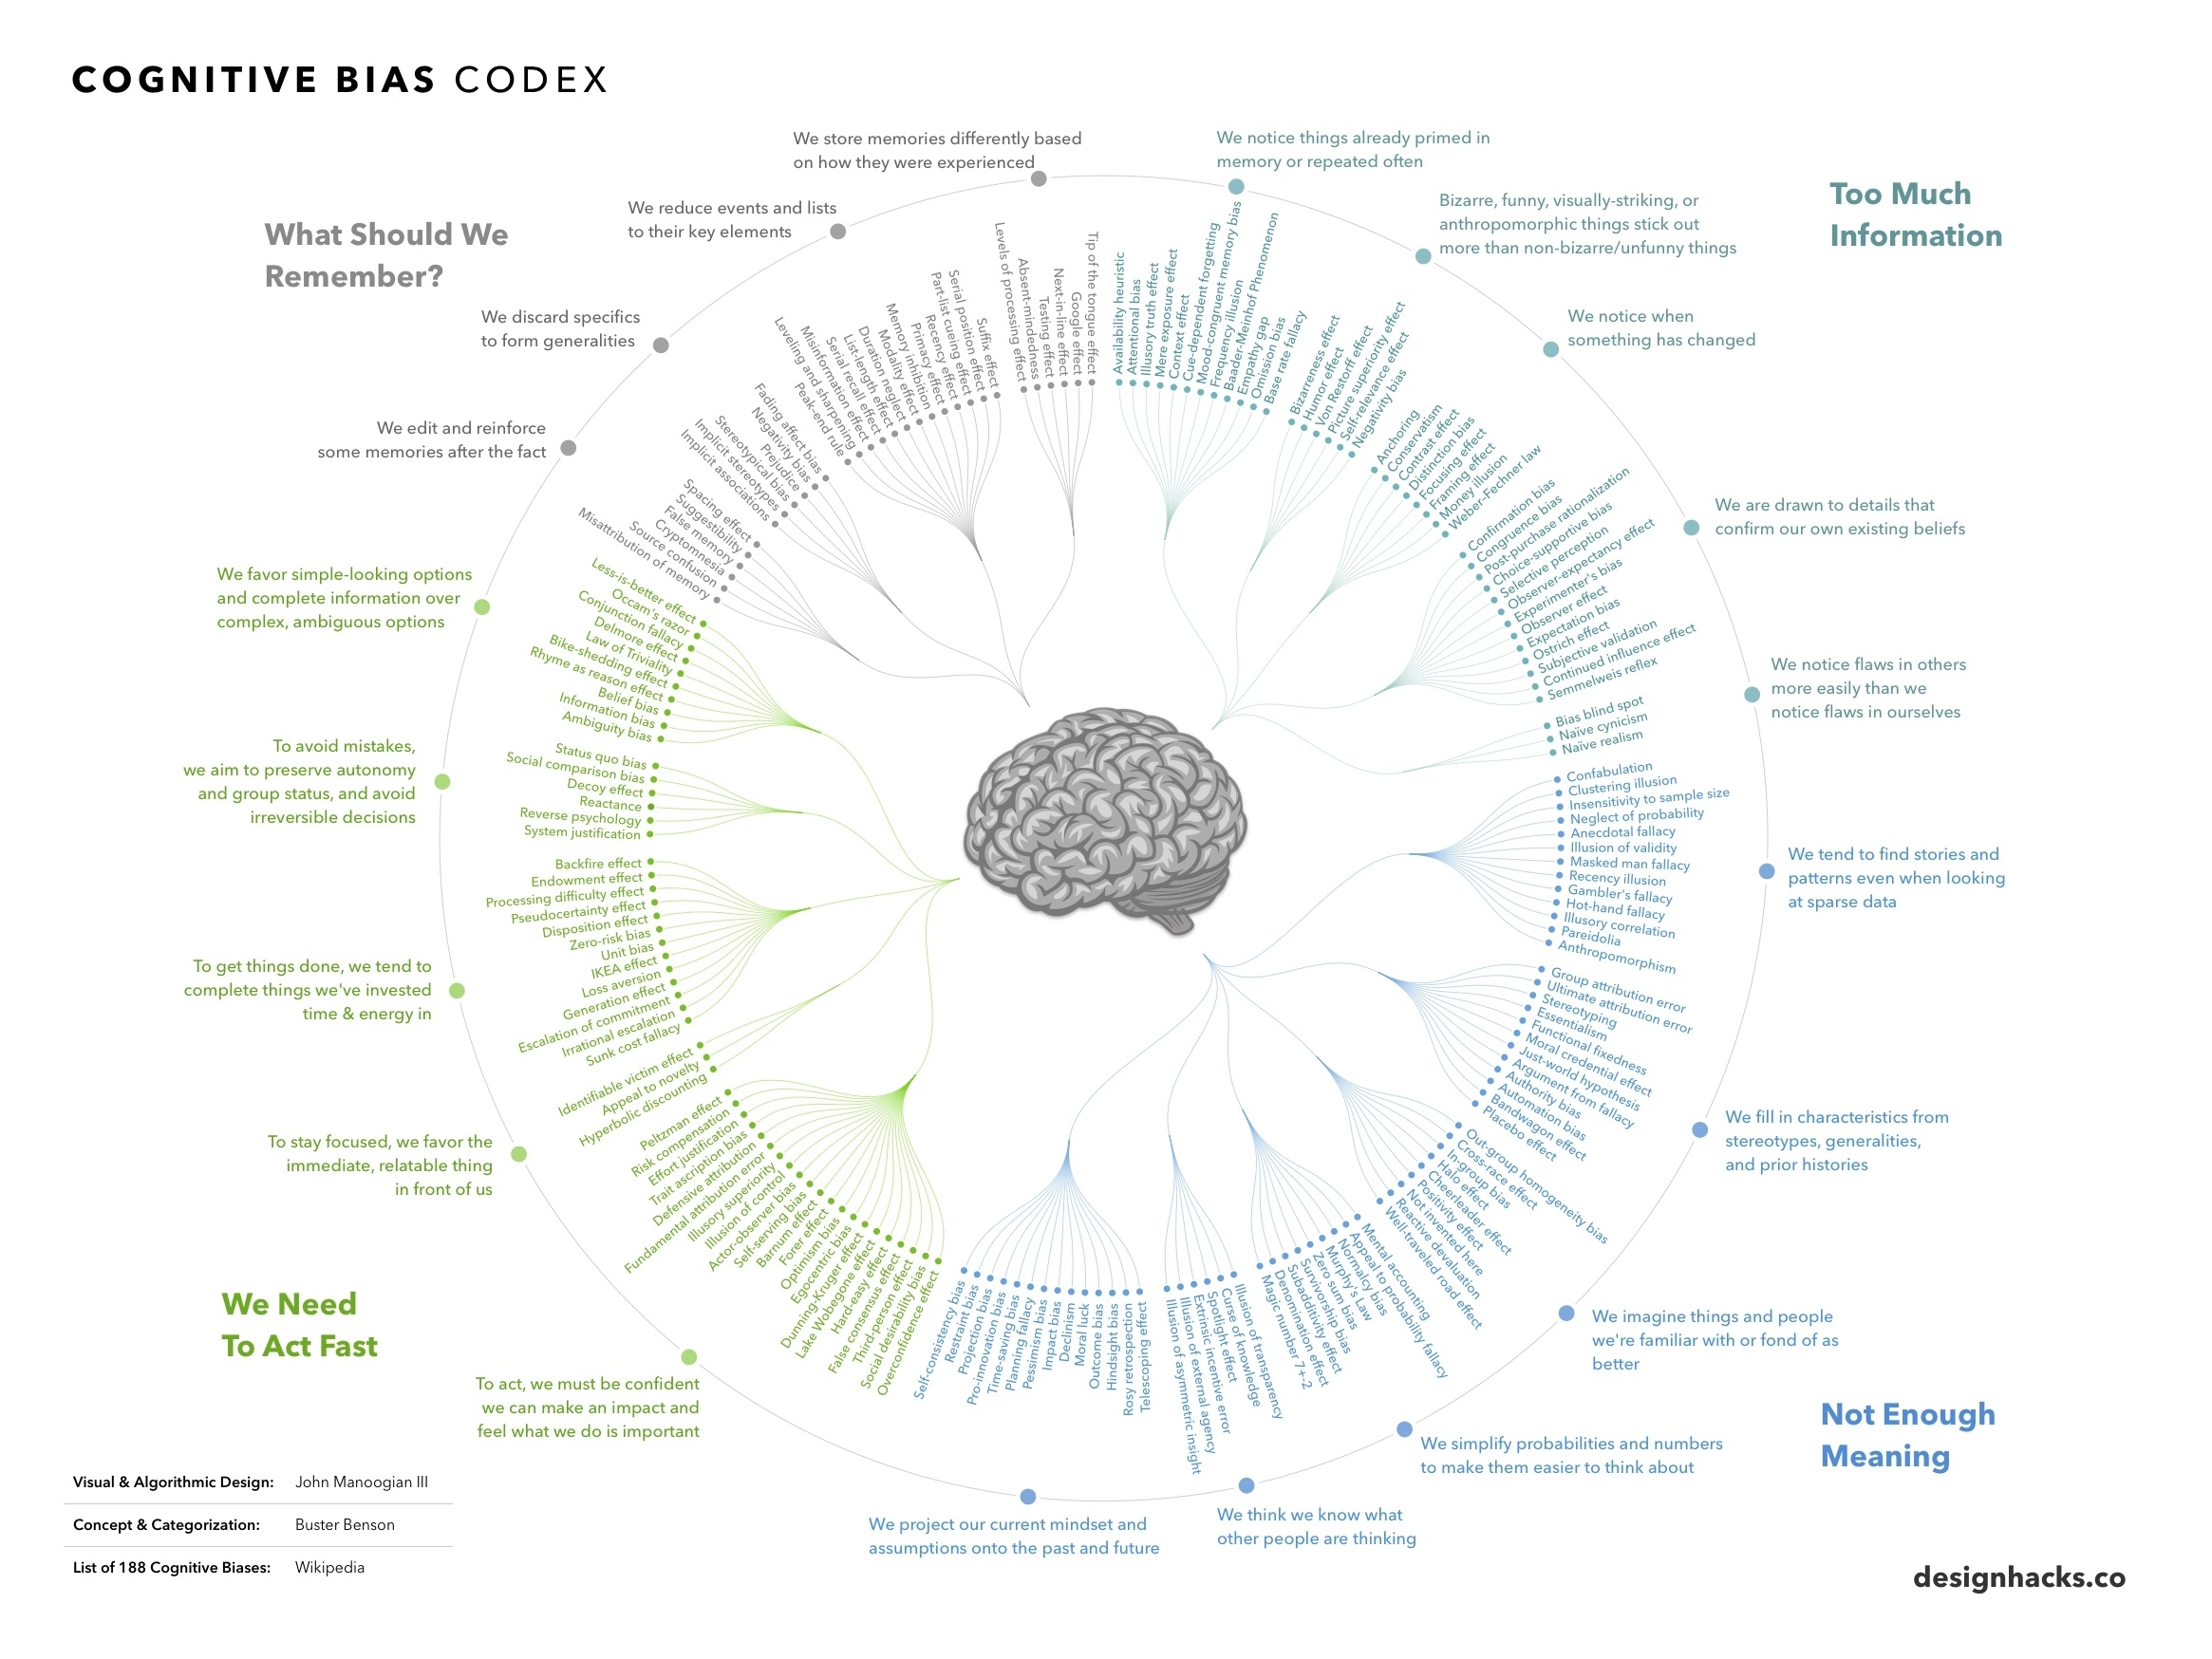 Every Single Cognitive Bias in One Infographic.